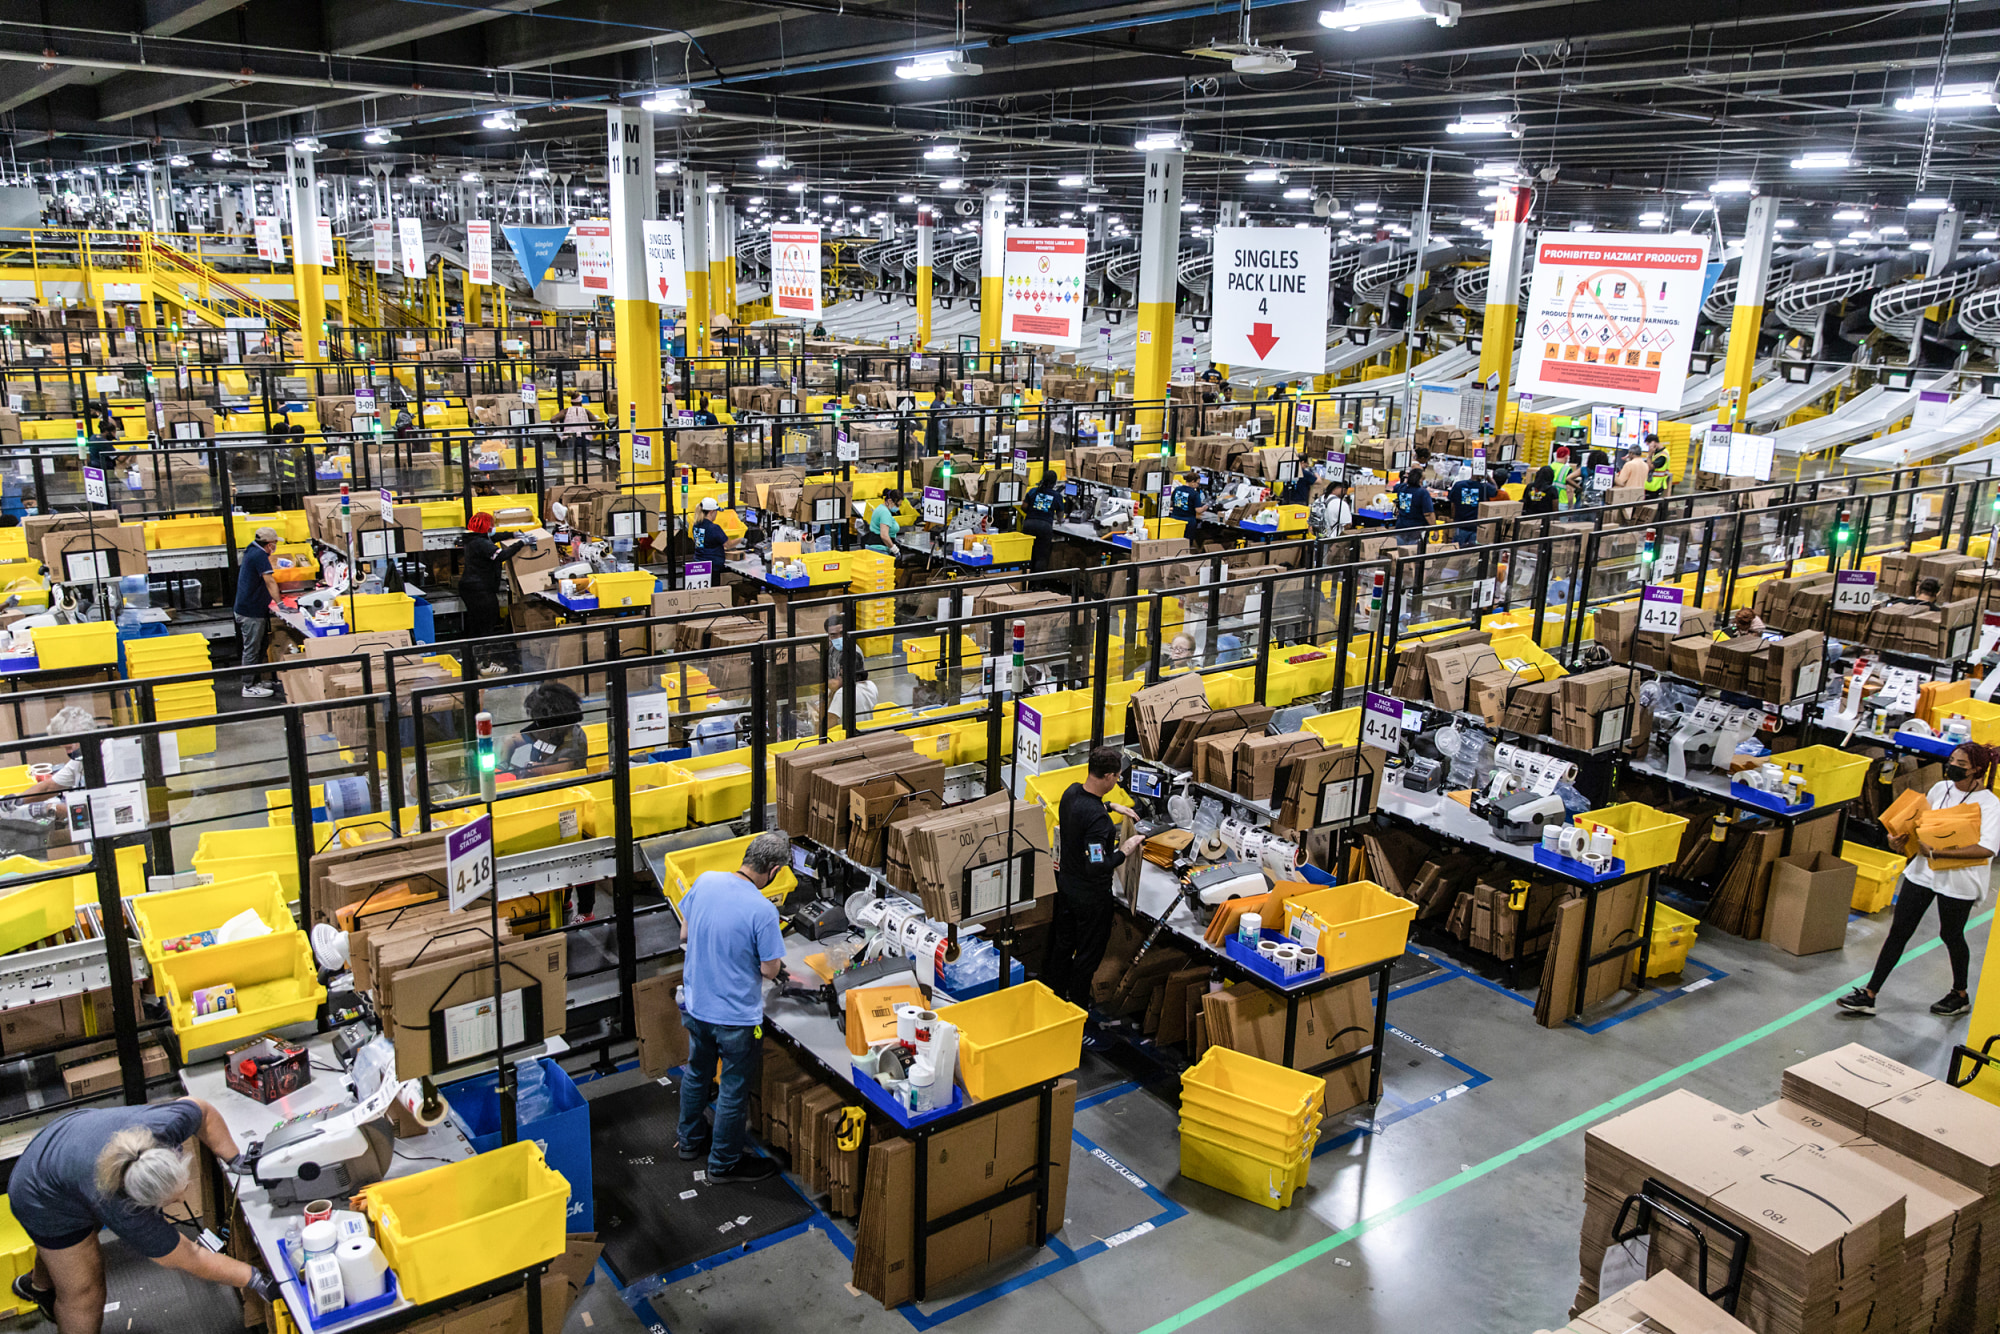 1 in every 169 U.S. workers is now employed by Amazon